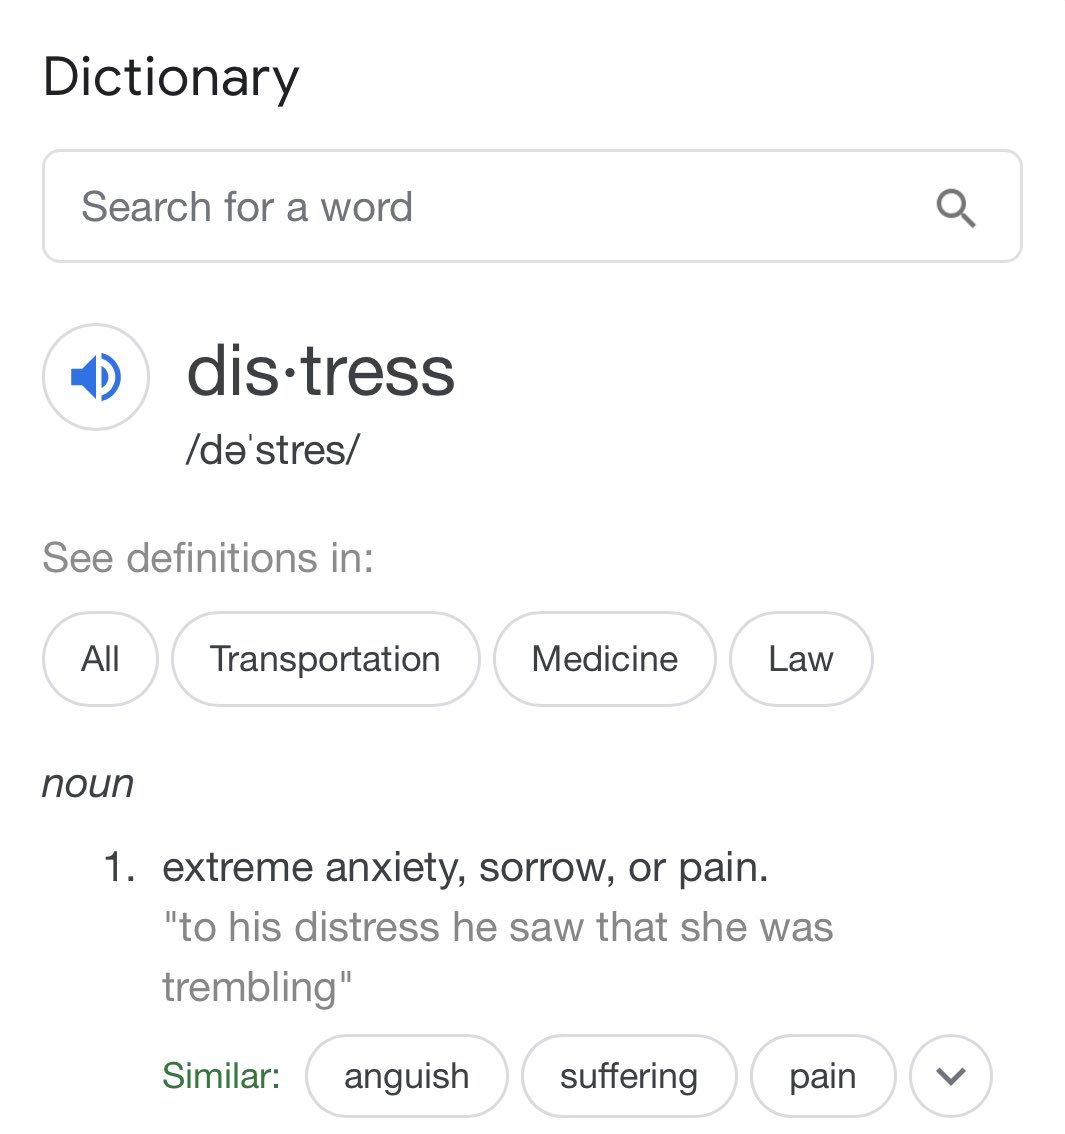 the word distress insinuates extreme anxiety, pain, or sorrow. this may come with gender incongruence but it may not, hearing someone is trans does not immediately mean they feel like this.